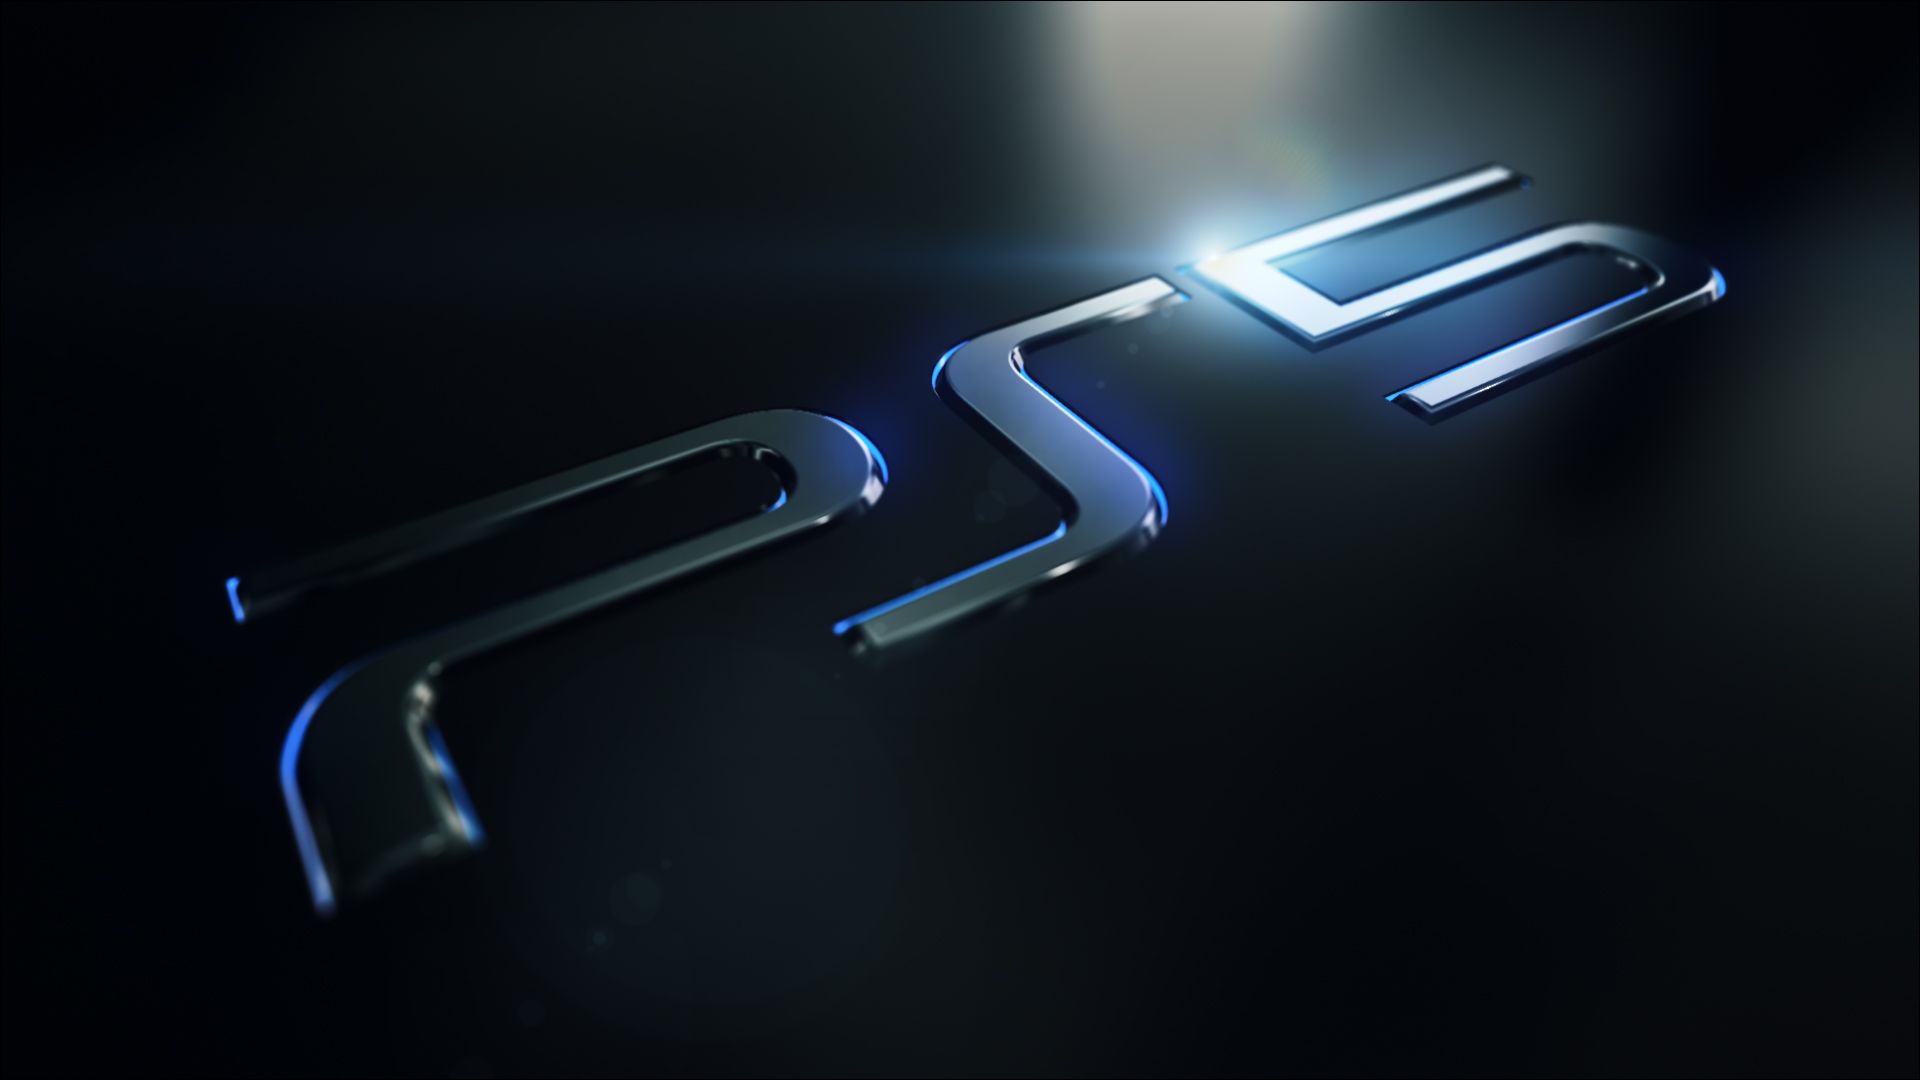 Ps5 4K Wallpaper Hd wallpapers and background images